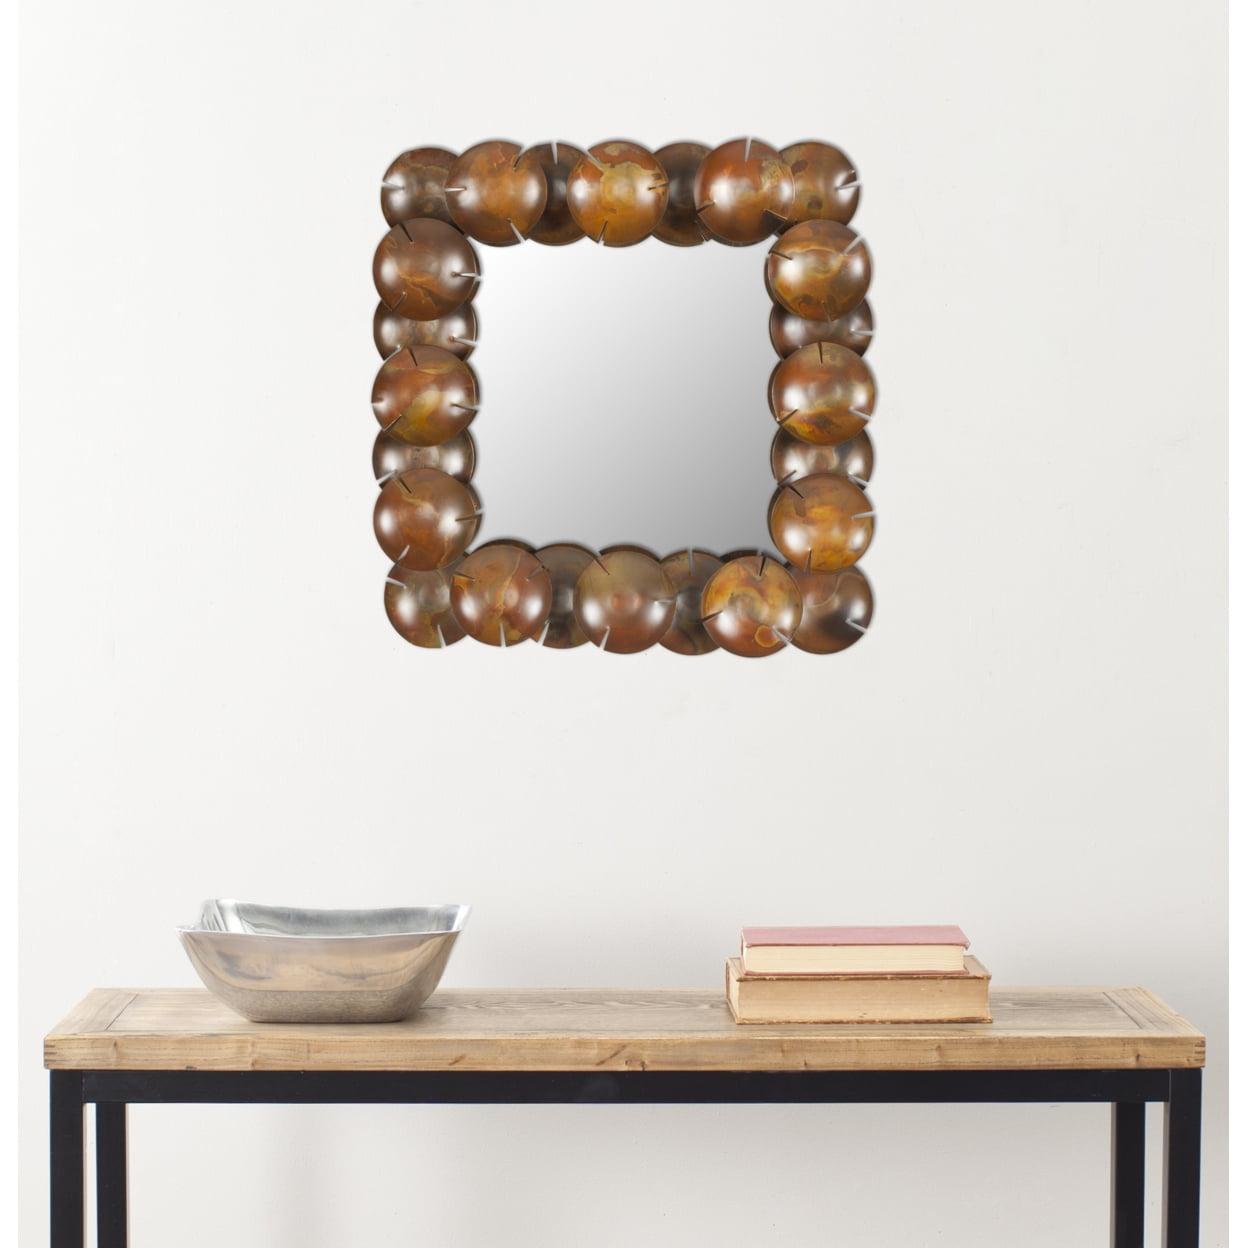 Contemporary Full-Length Square Wood Mirror in Warm Brown